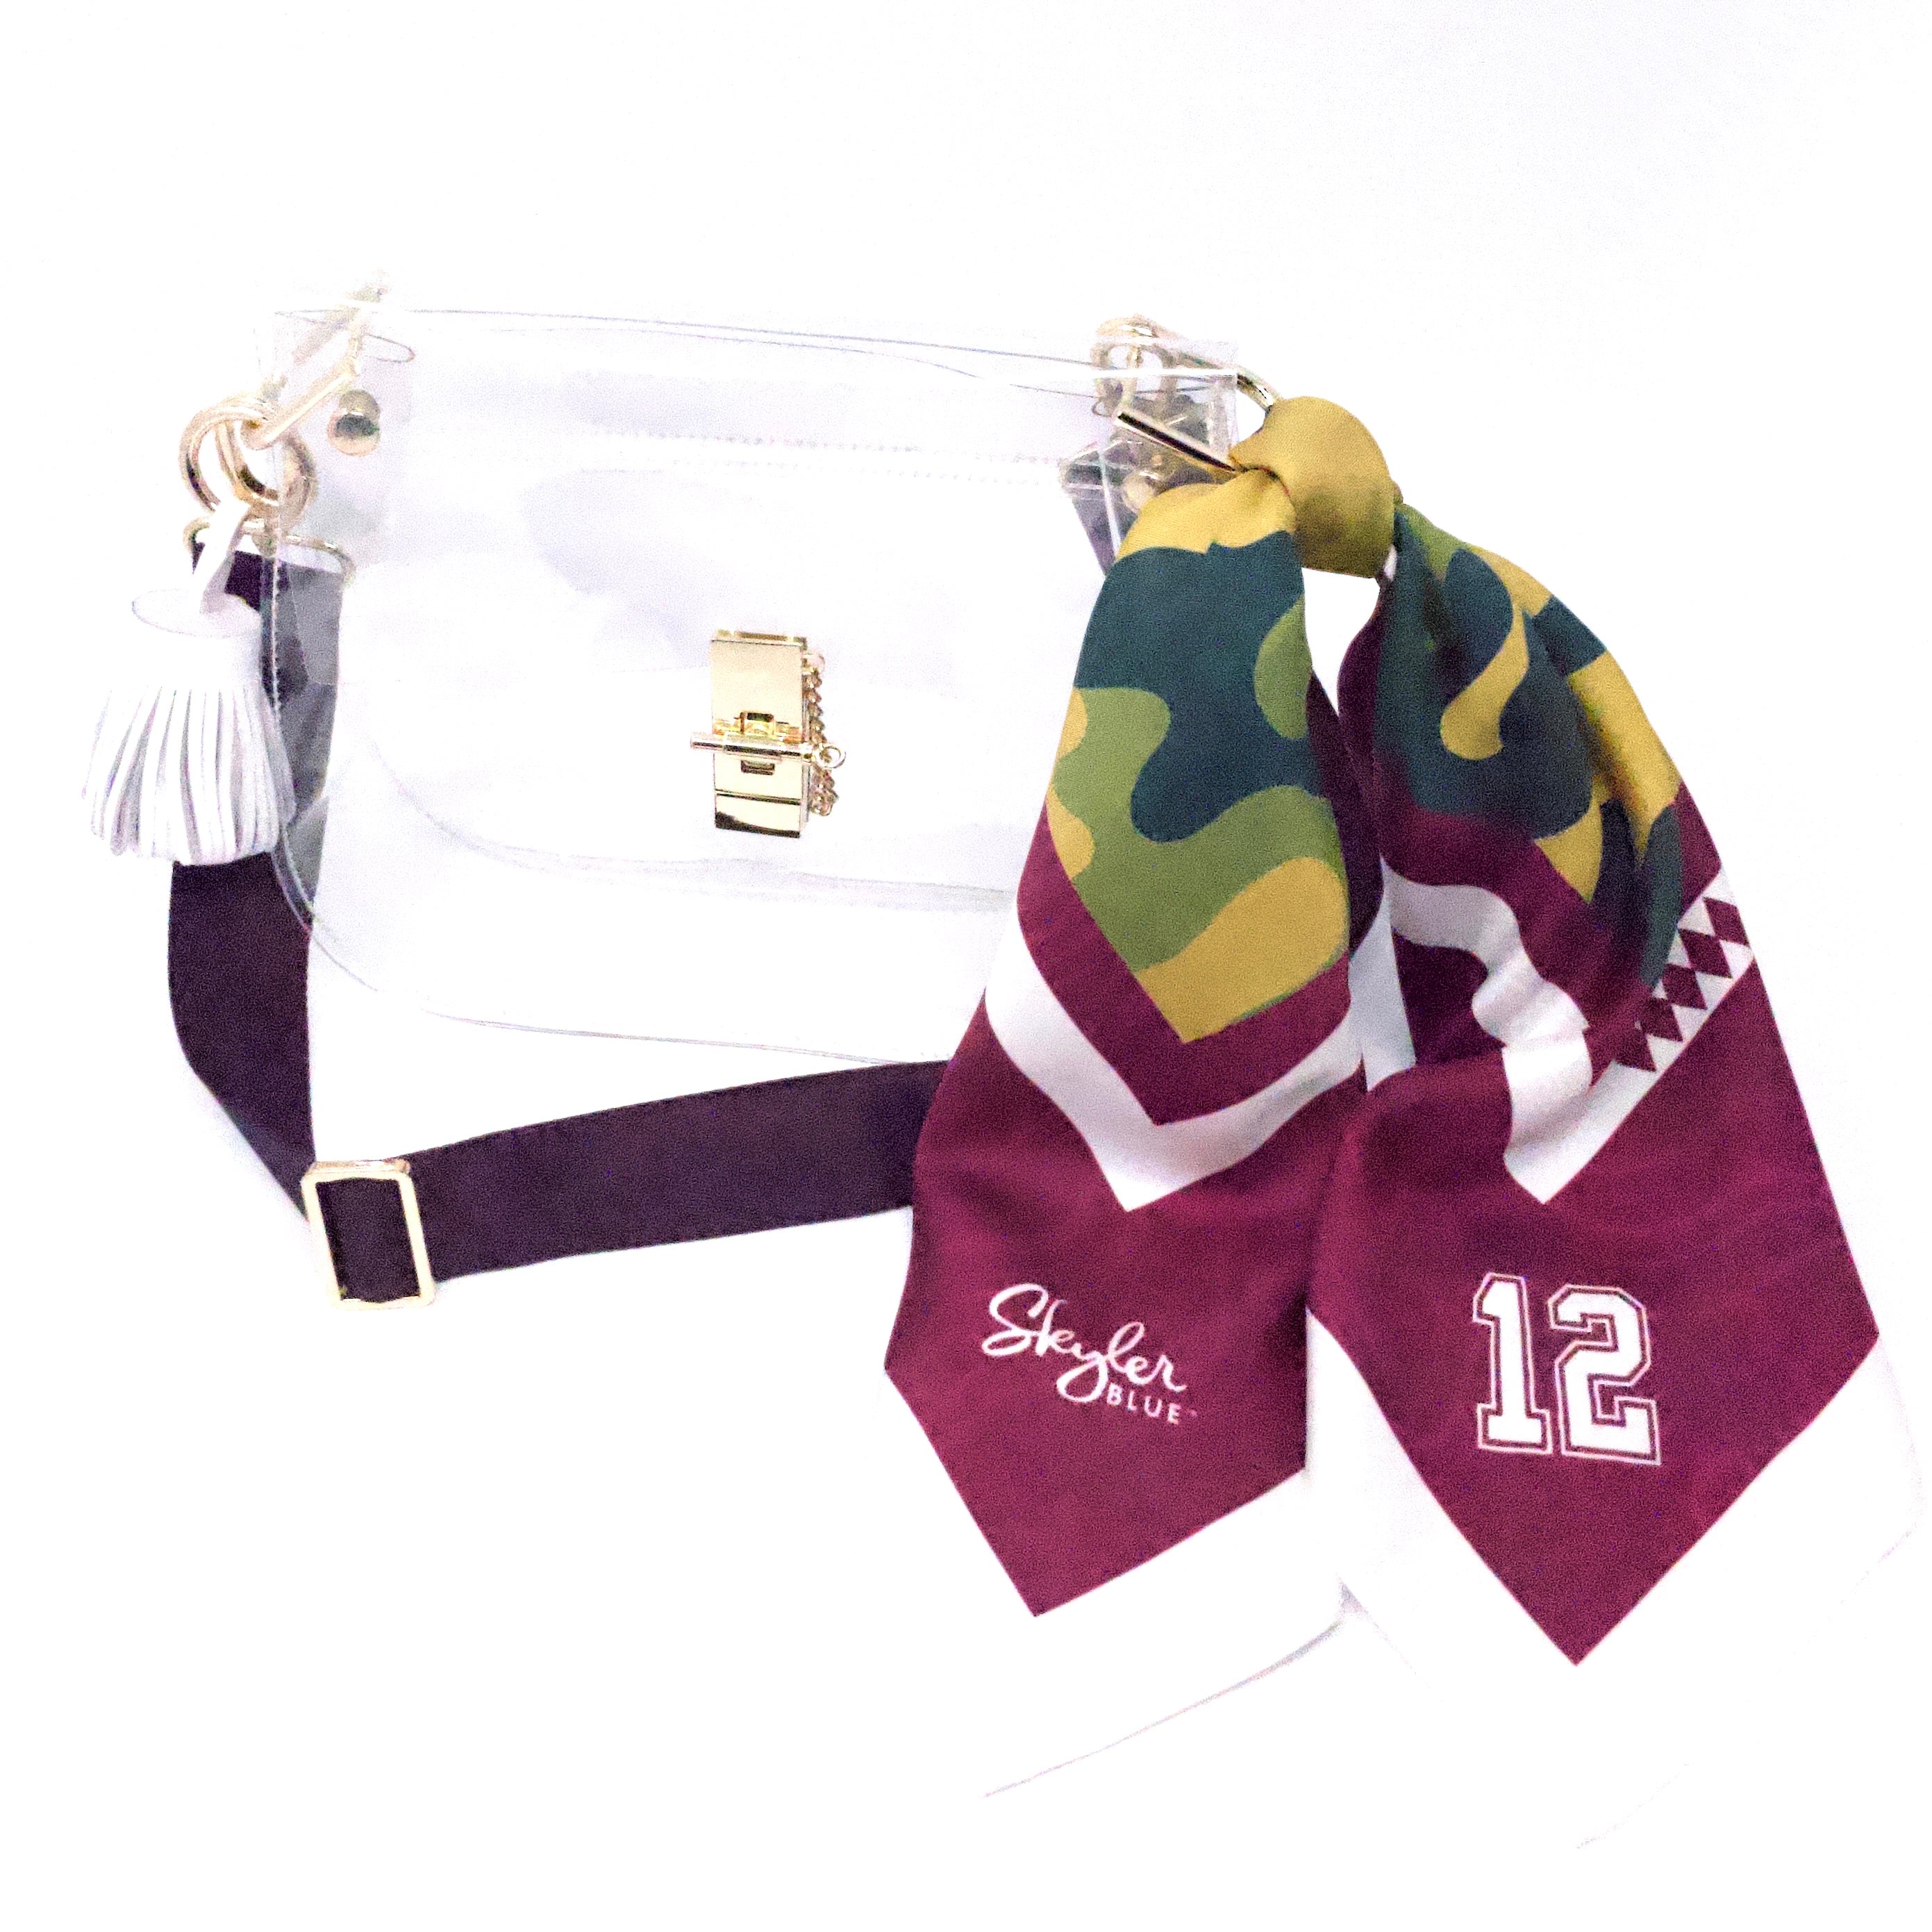 Skyler Blue’s The College Station Medium Saddle Clear Bag stadium approved clear bag / clear purse including adjustable, nylon webbing shoulder or crossbody strap with herringbone weave and gold hardware, 60-centimeter 100% silk twill scarf, and 100% genuine leather tassel. 